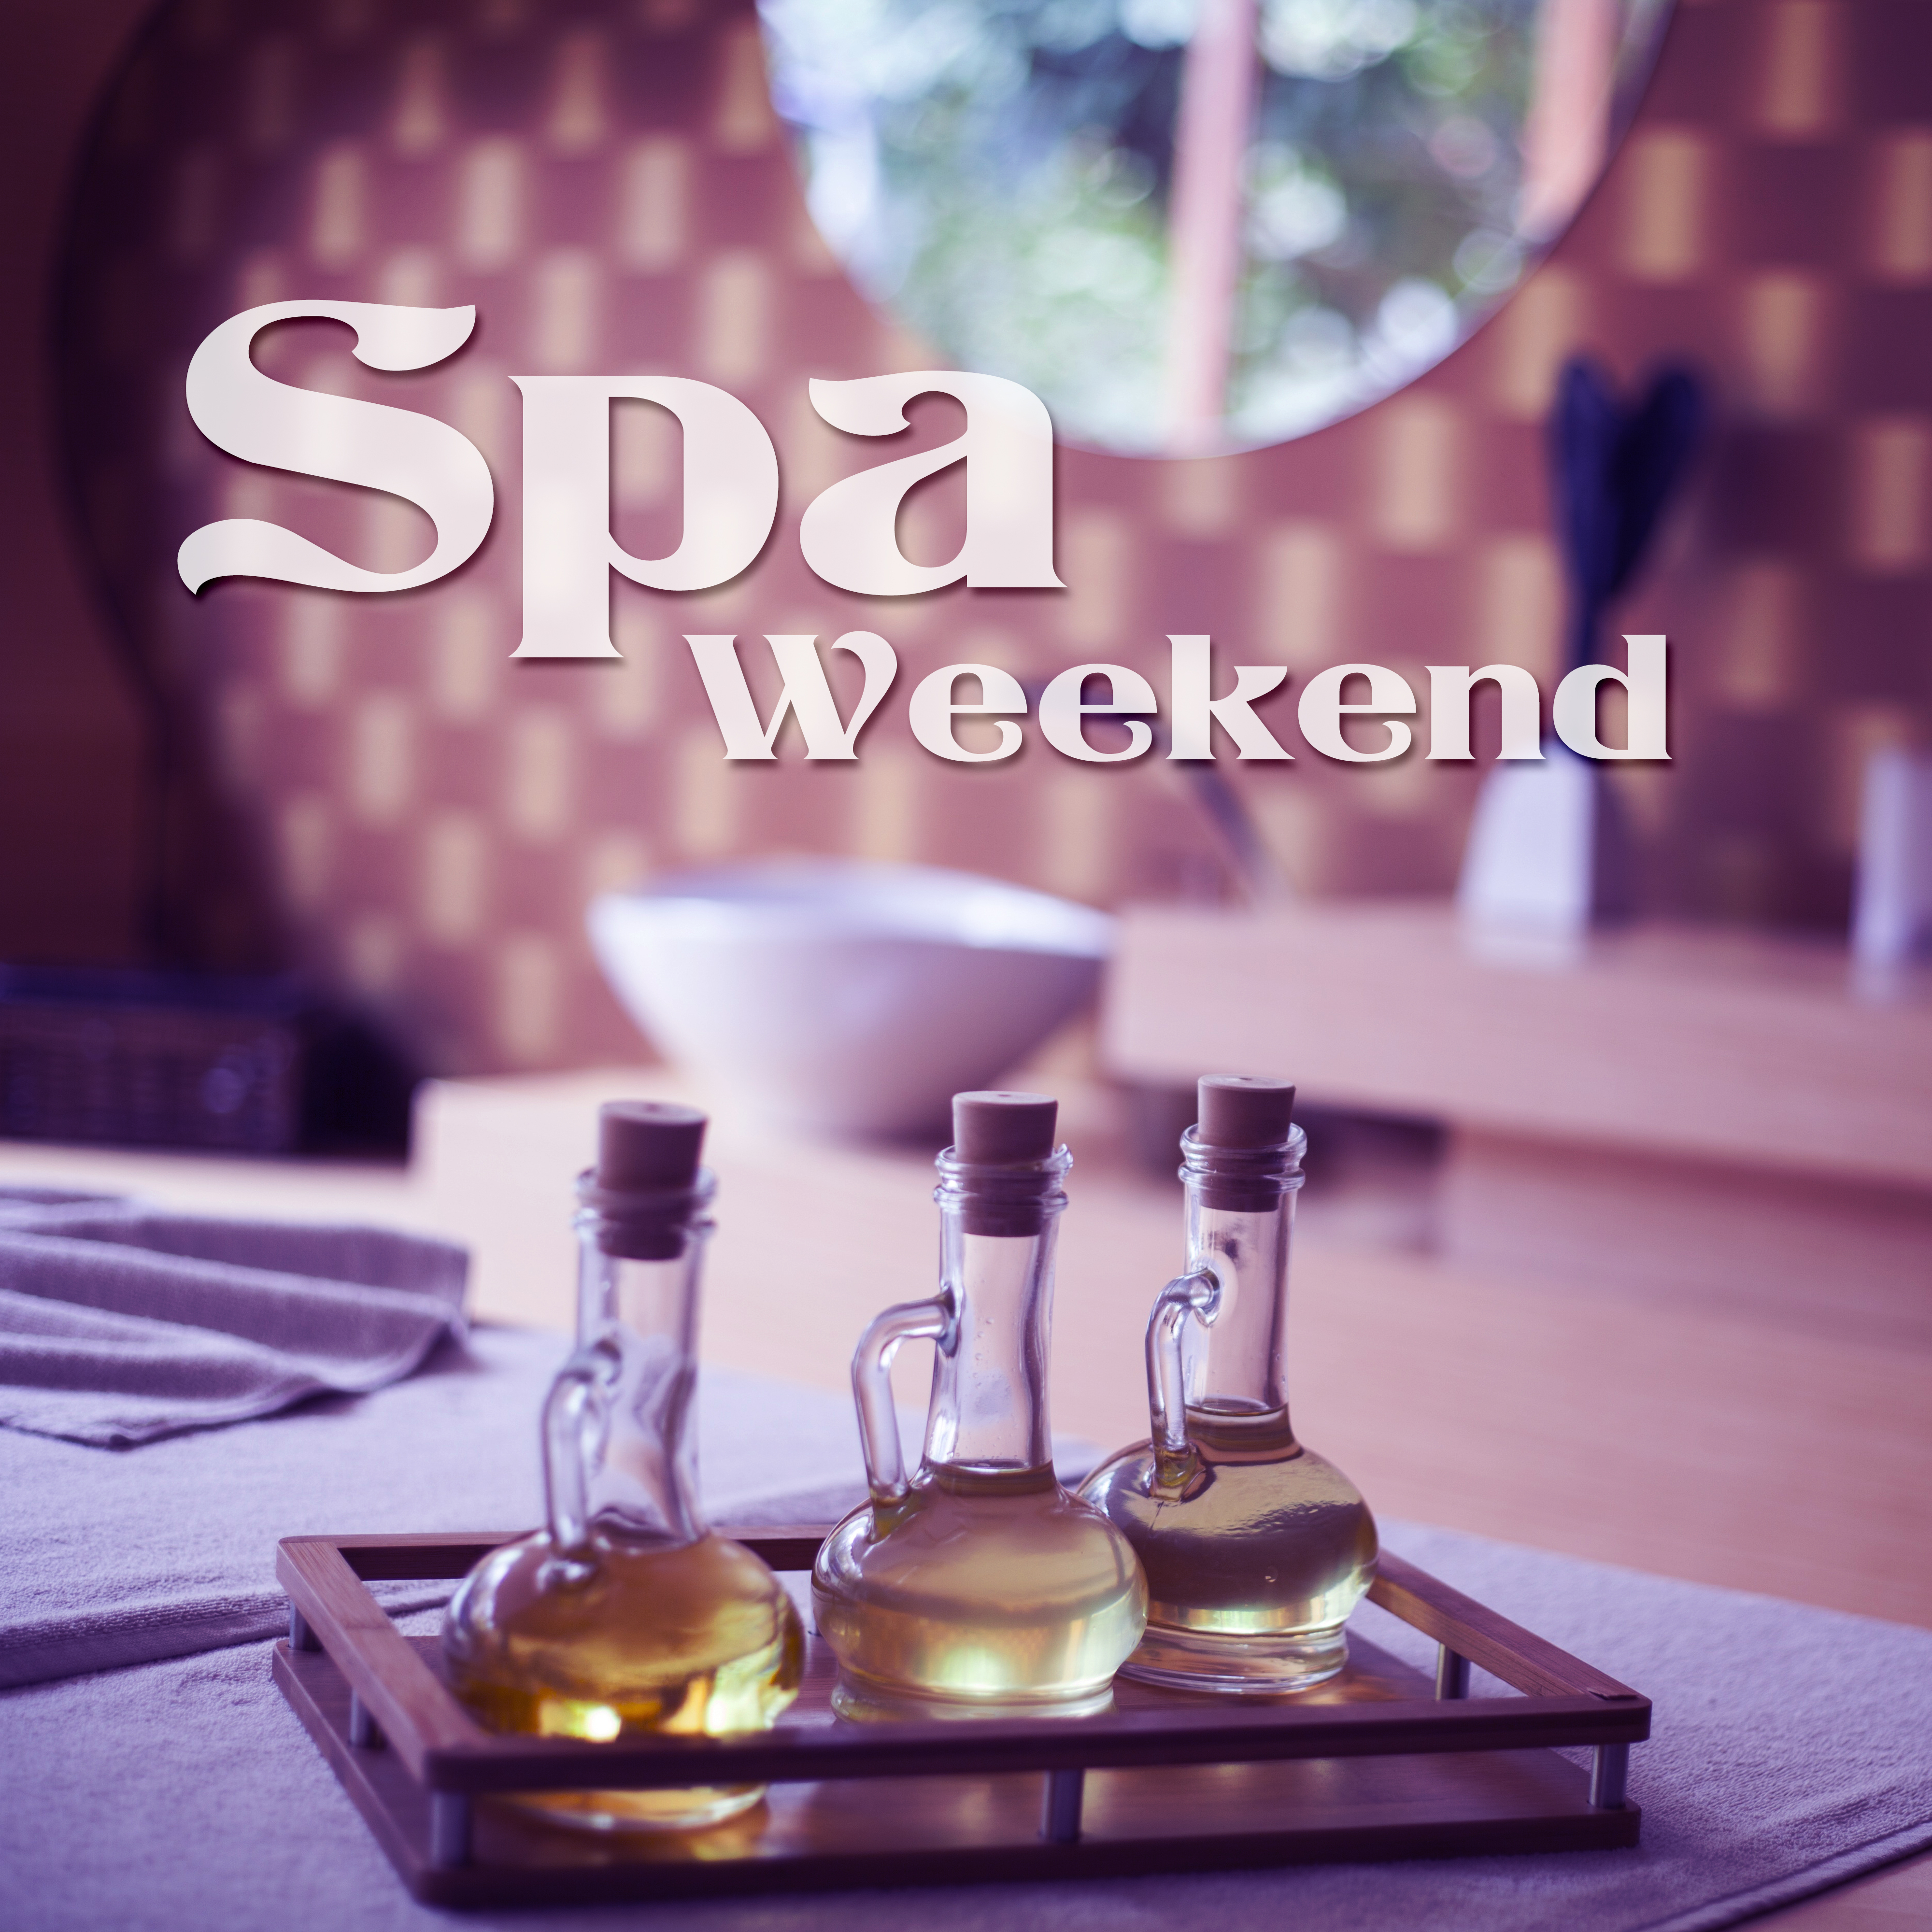 Spa Weekend  New Age Music for Massage, Bath Spa, Spa At Home, Relaxed Body  Mind, Relaxing Therapy